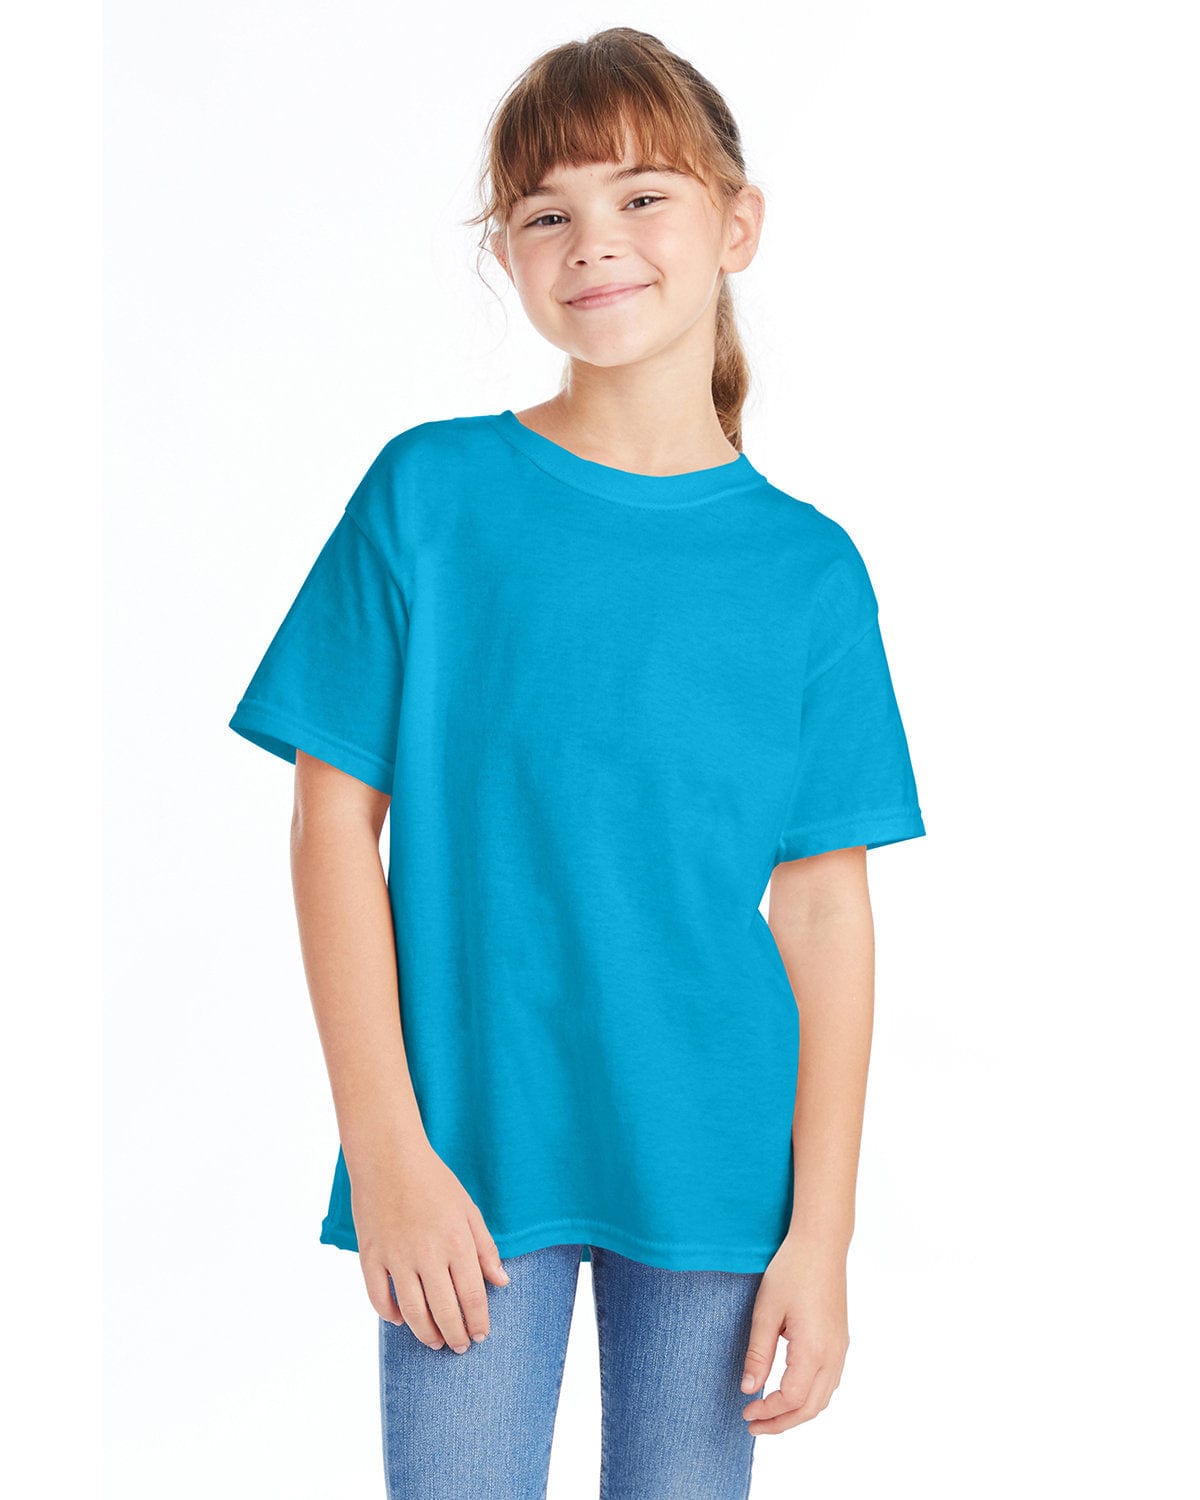 Girl's Shirt by Hanes size S/SP/Ch blue in color Children's RN 15763